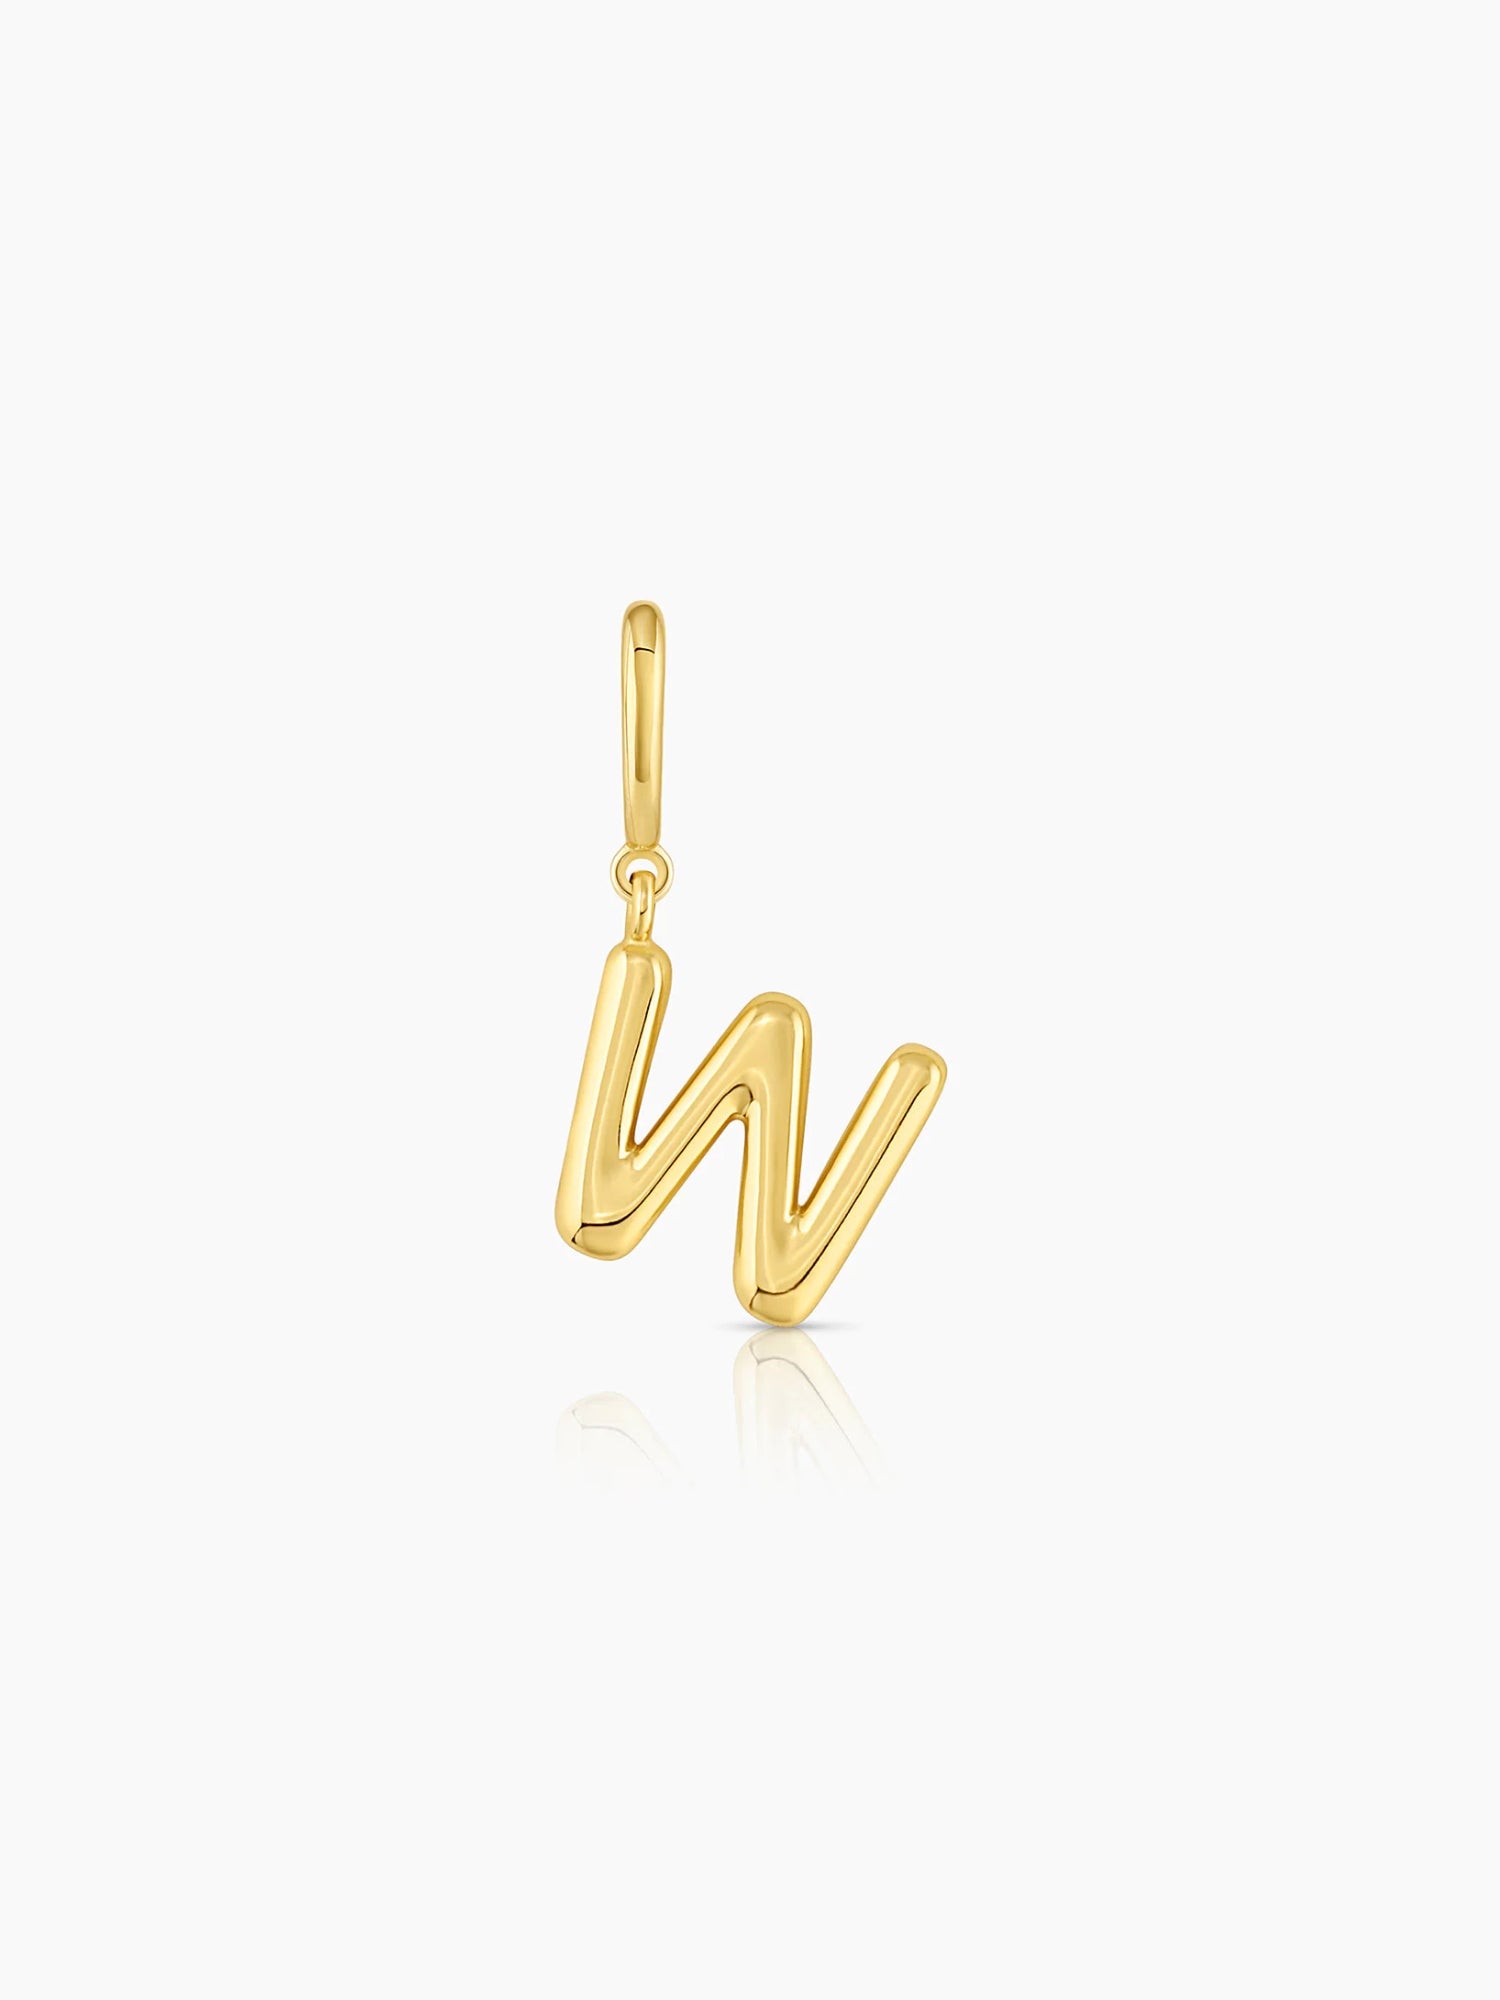 Alphabet Helium Parker Charm in L/Gold Plated, Women's by Gorjana